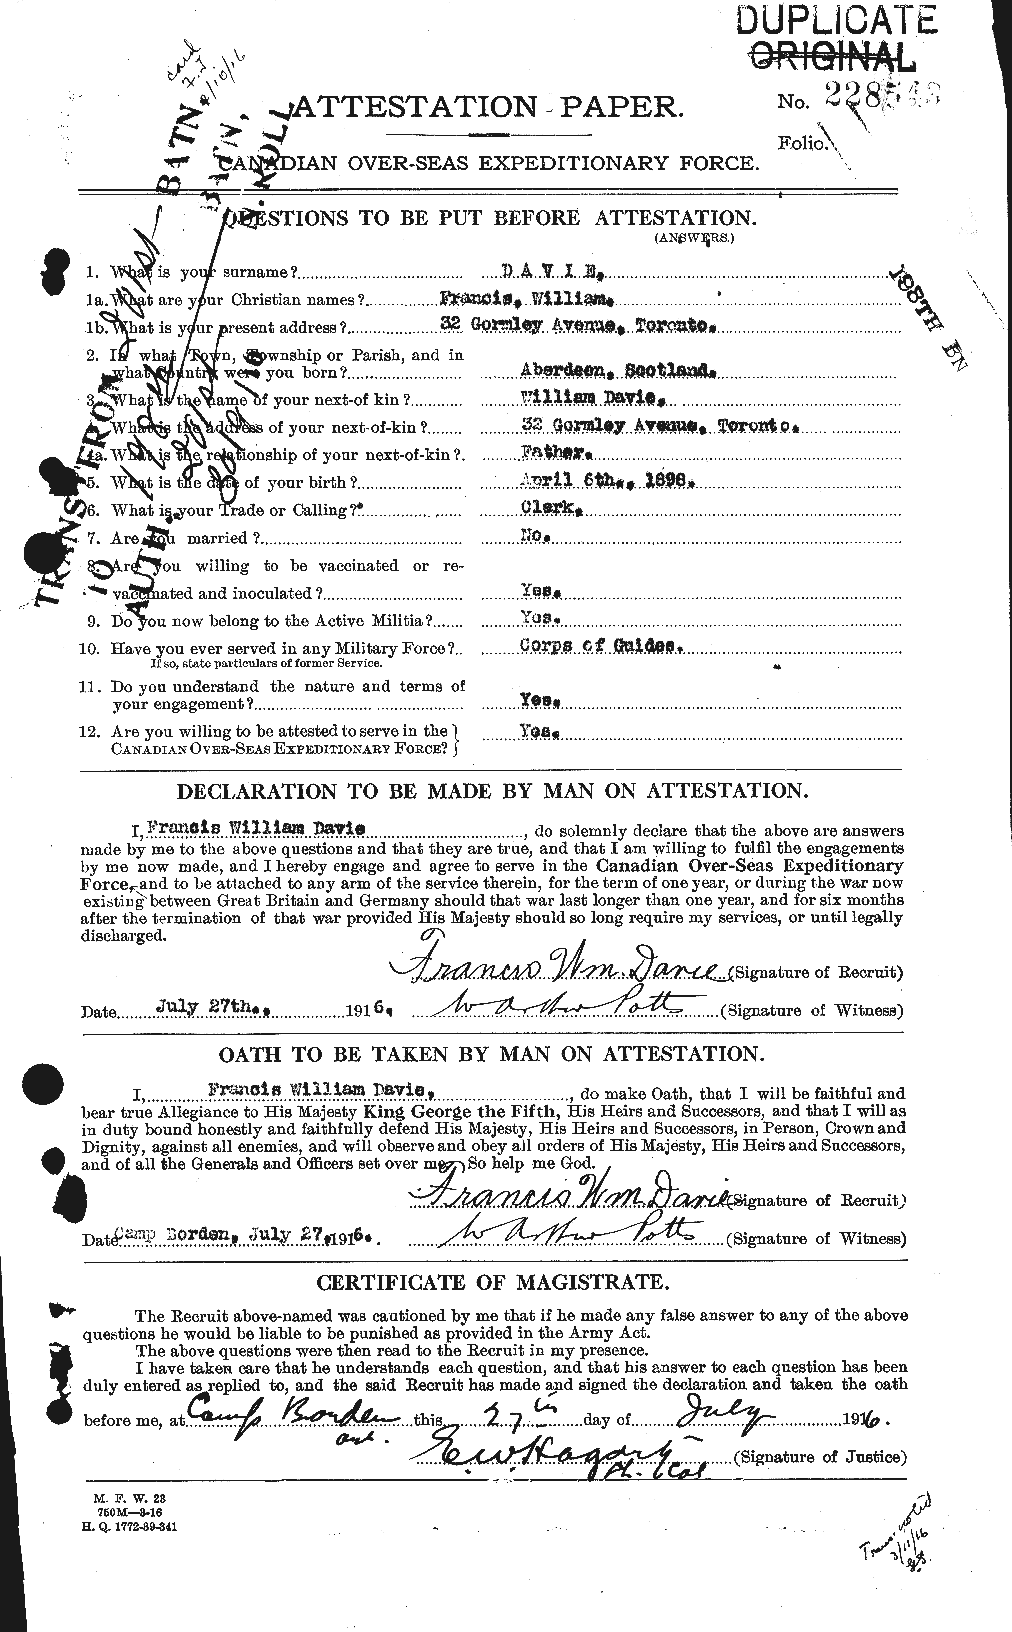 Personnel Records of the First World War - CEF 278821a